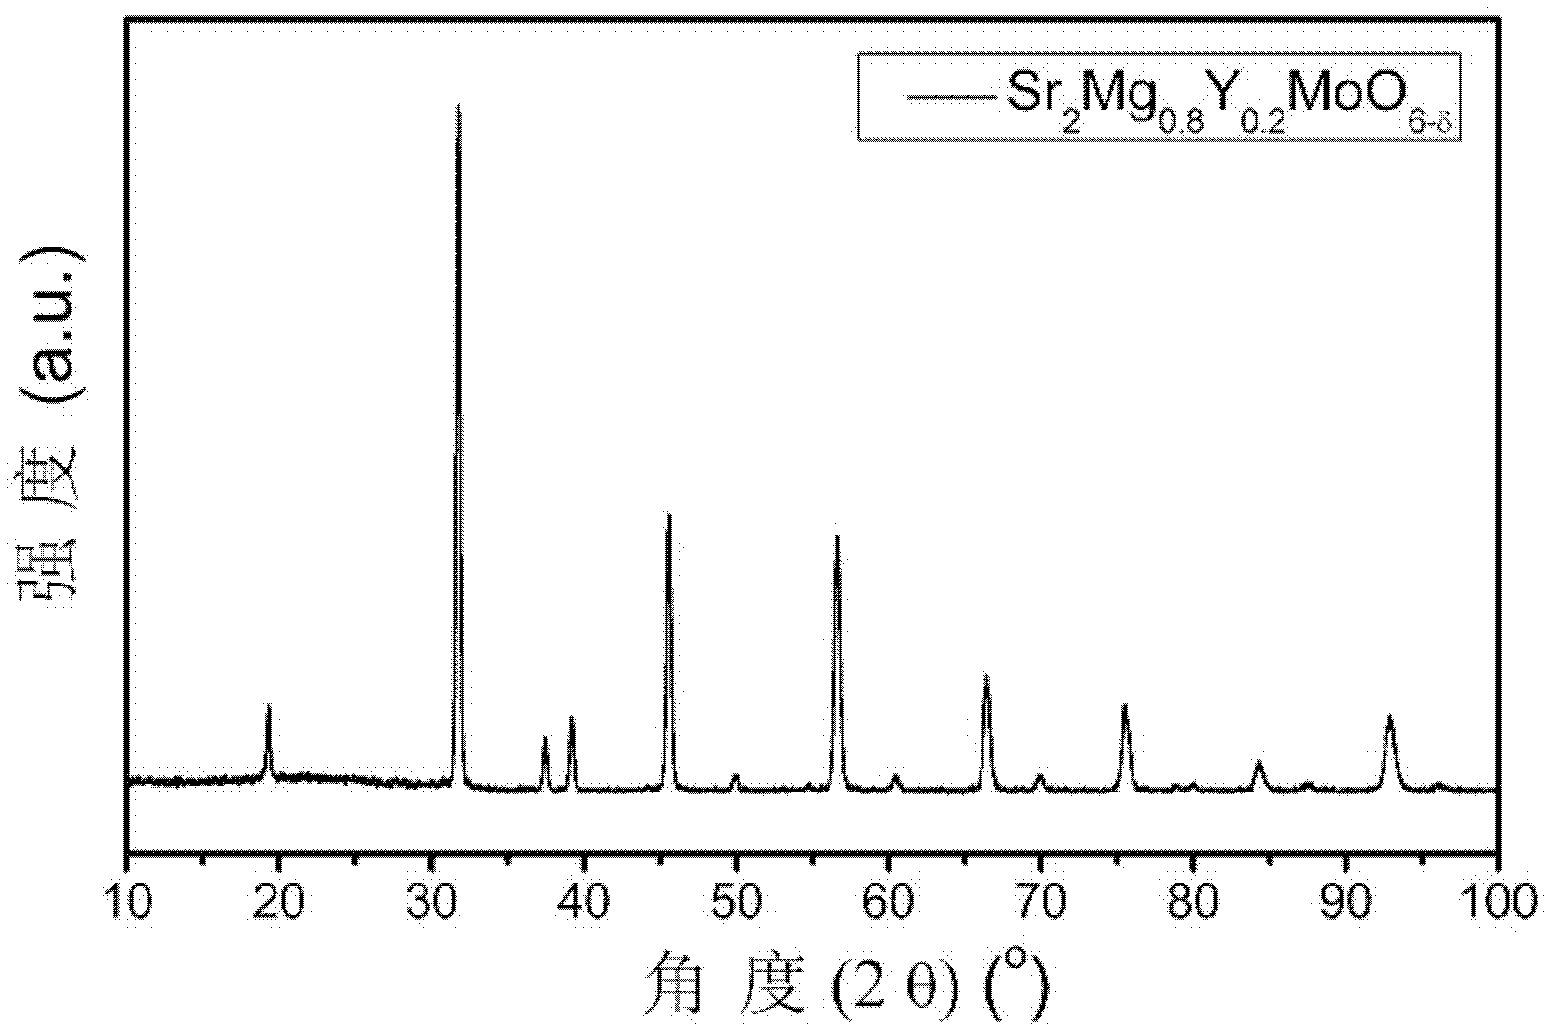 High-conductivity double-perovskite-type anode material and preparation method thereof